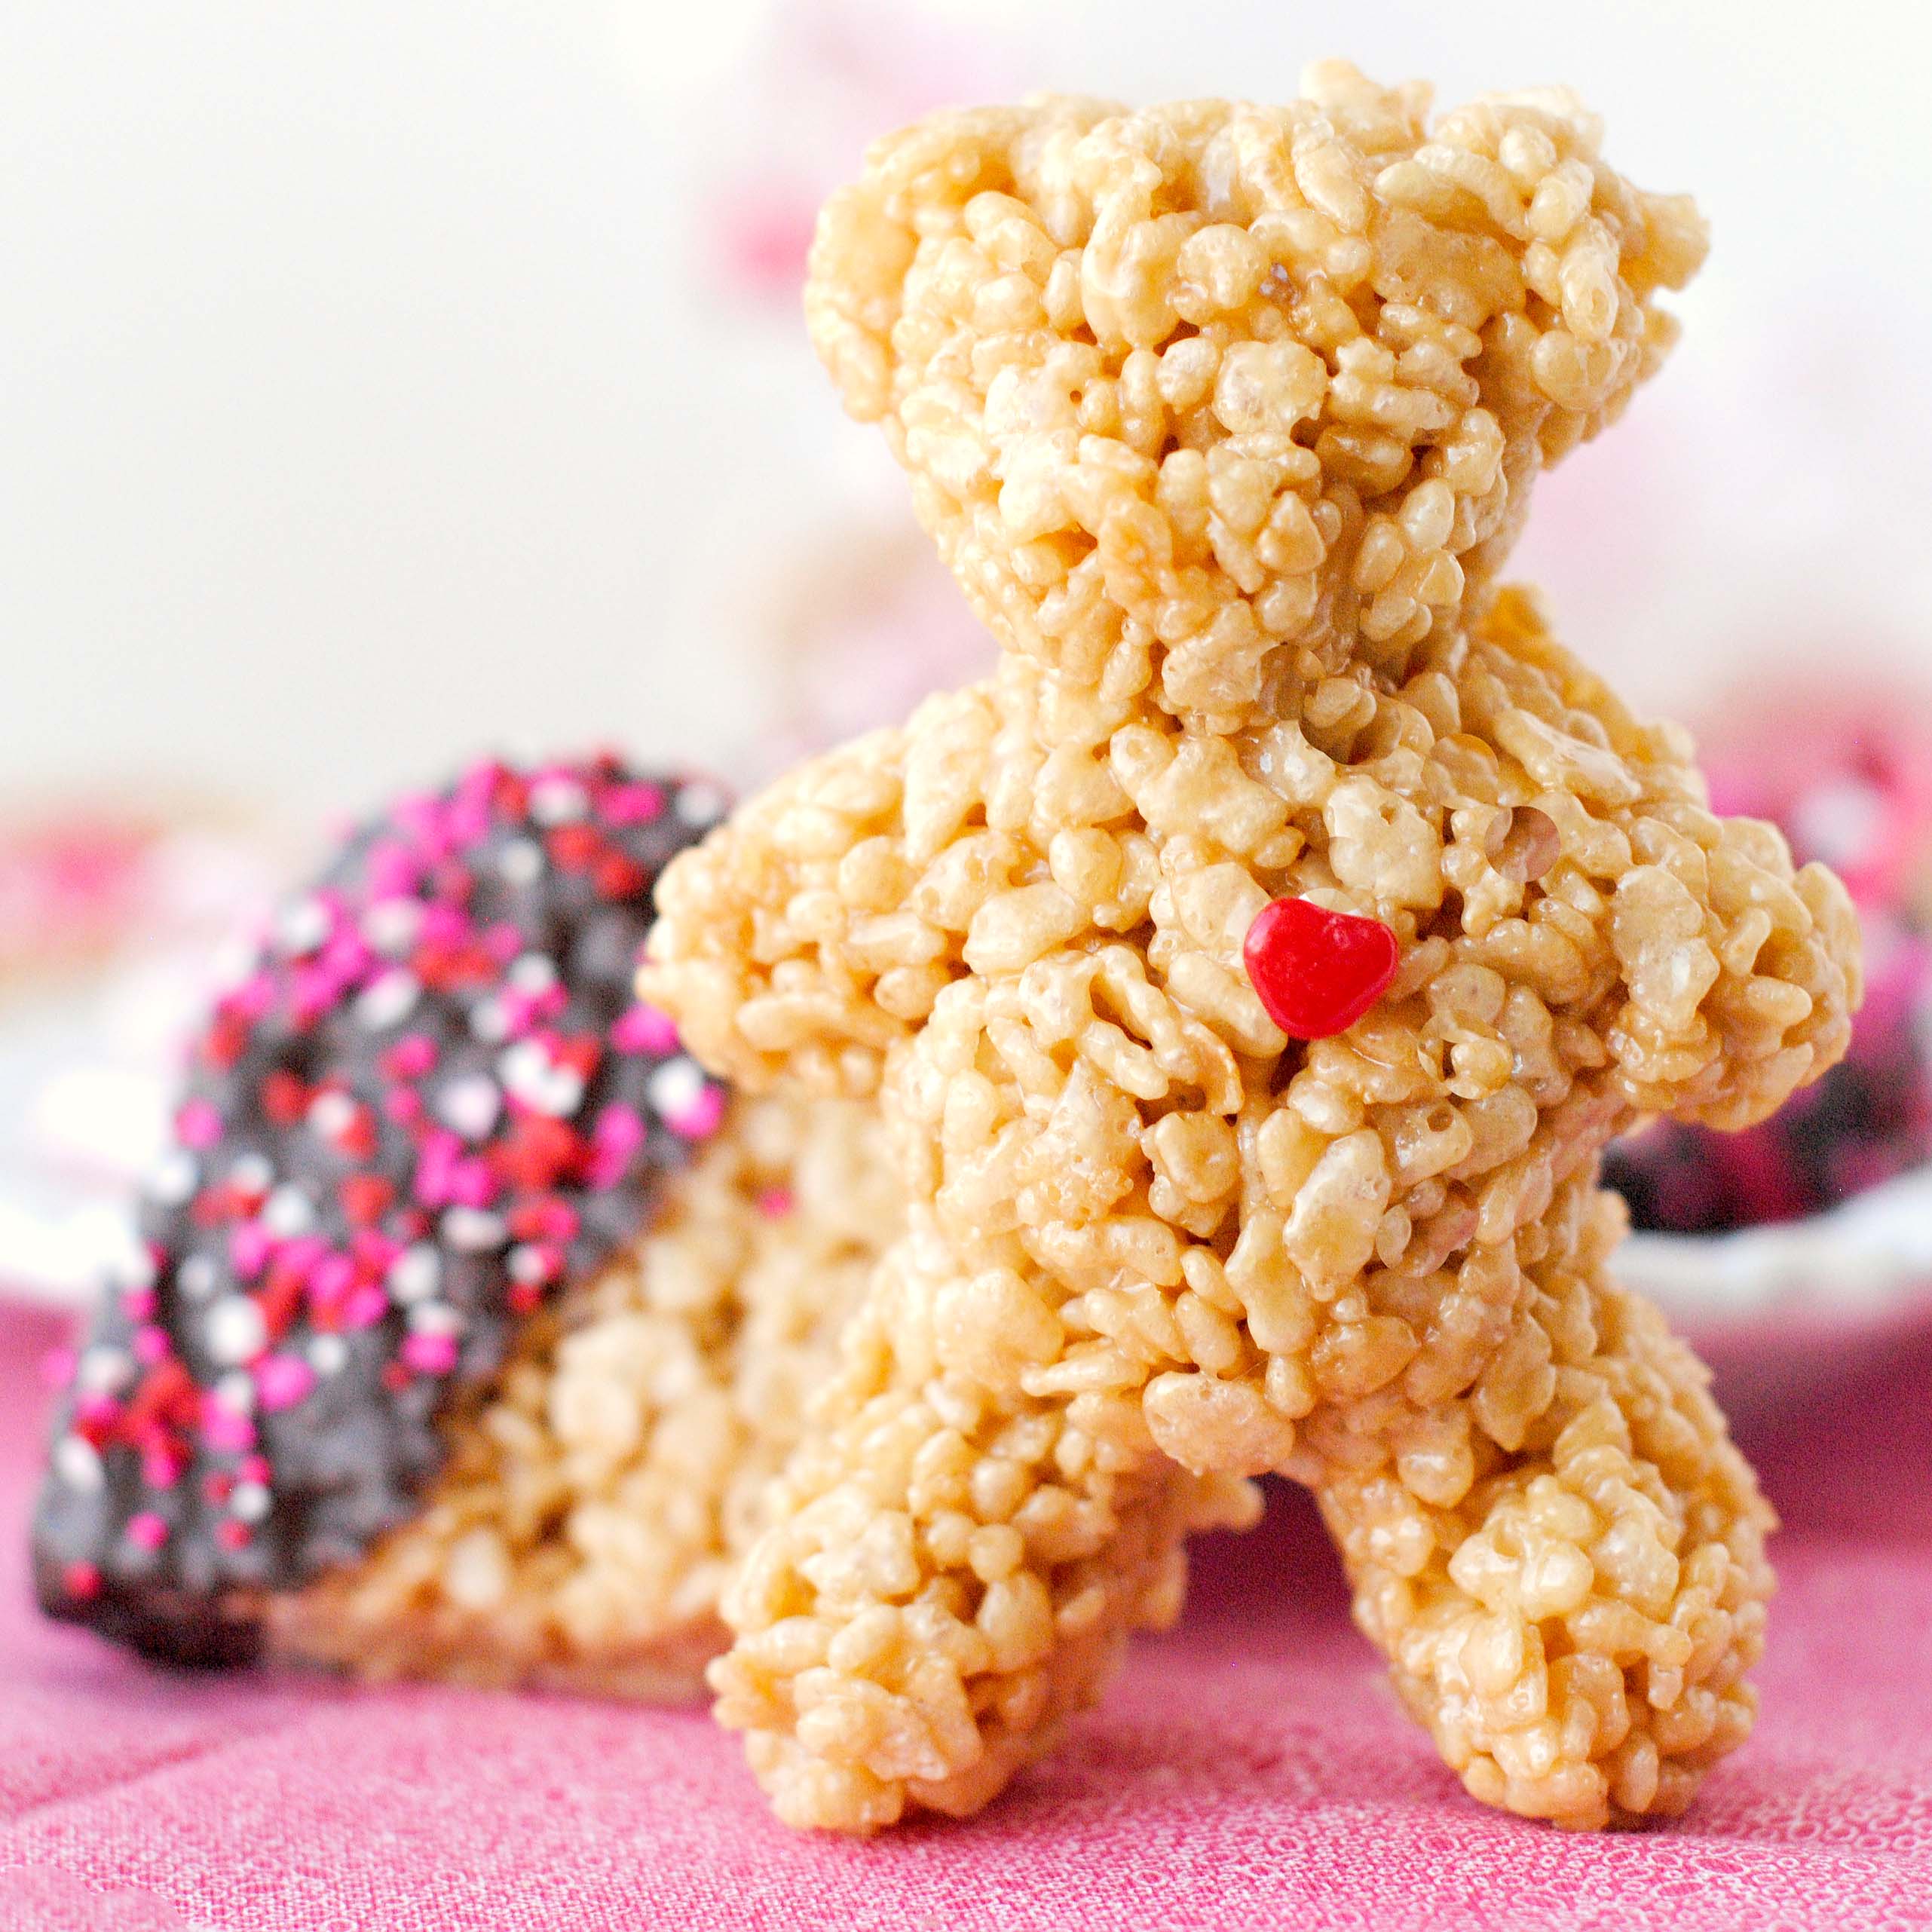 I found a different type of Rice Krispie treat recipe that immediately repl...